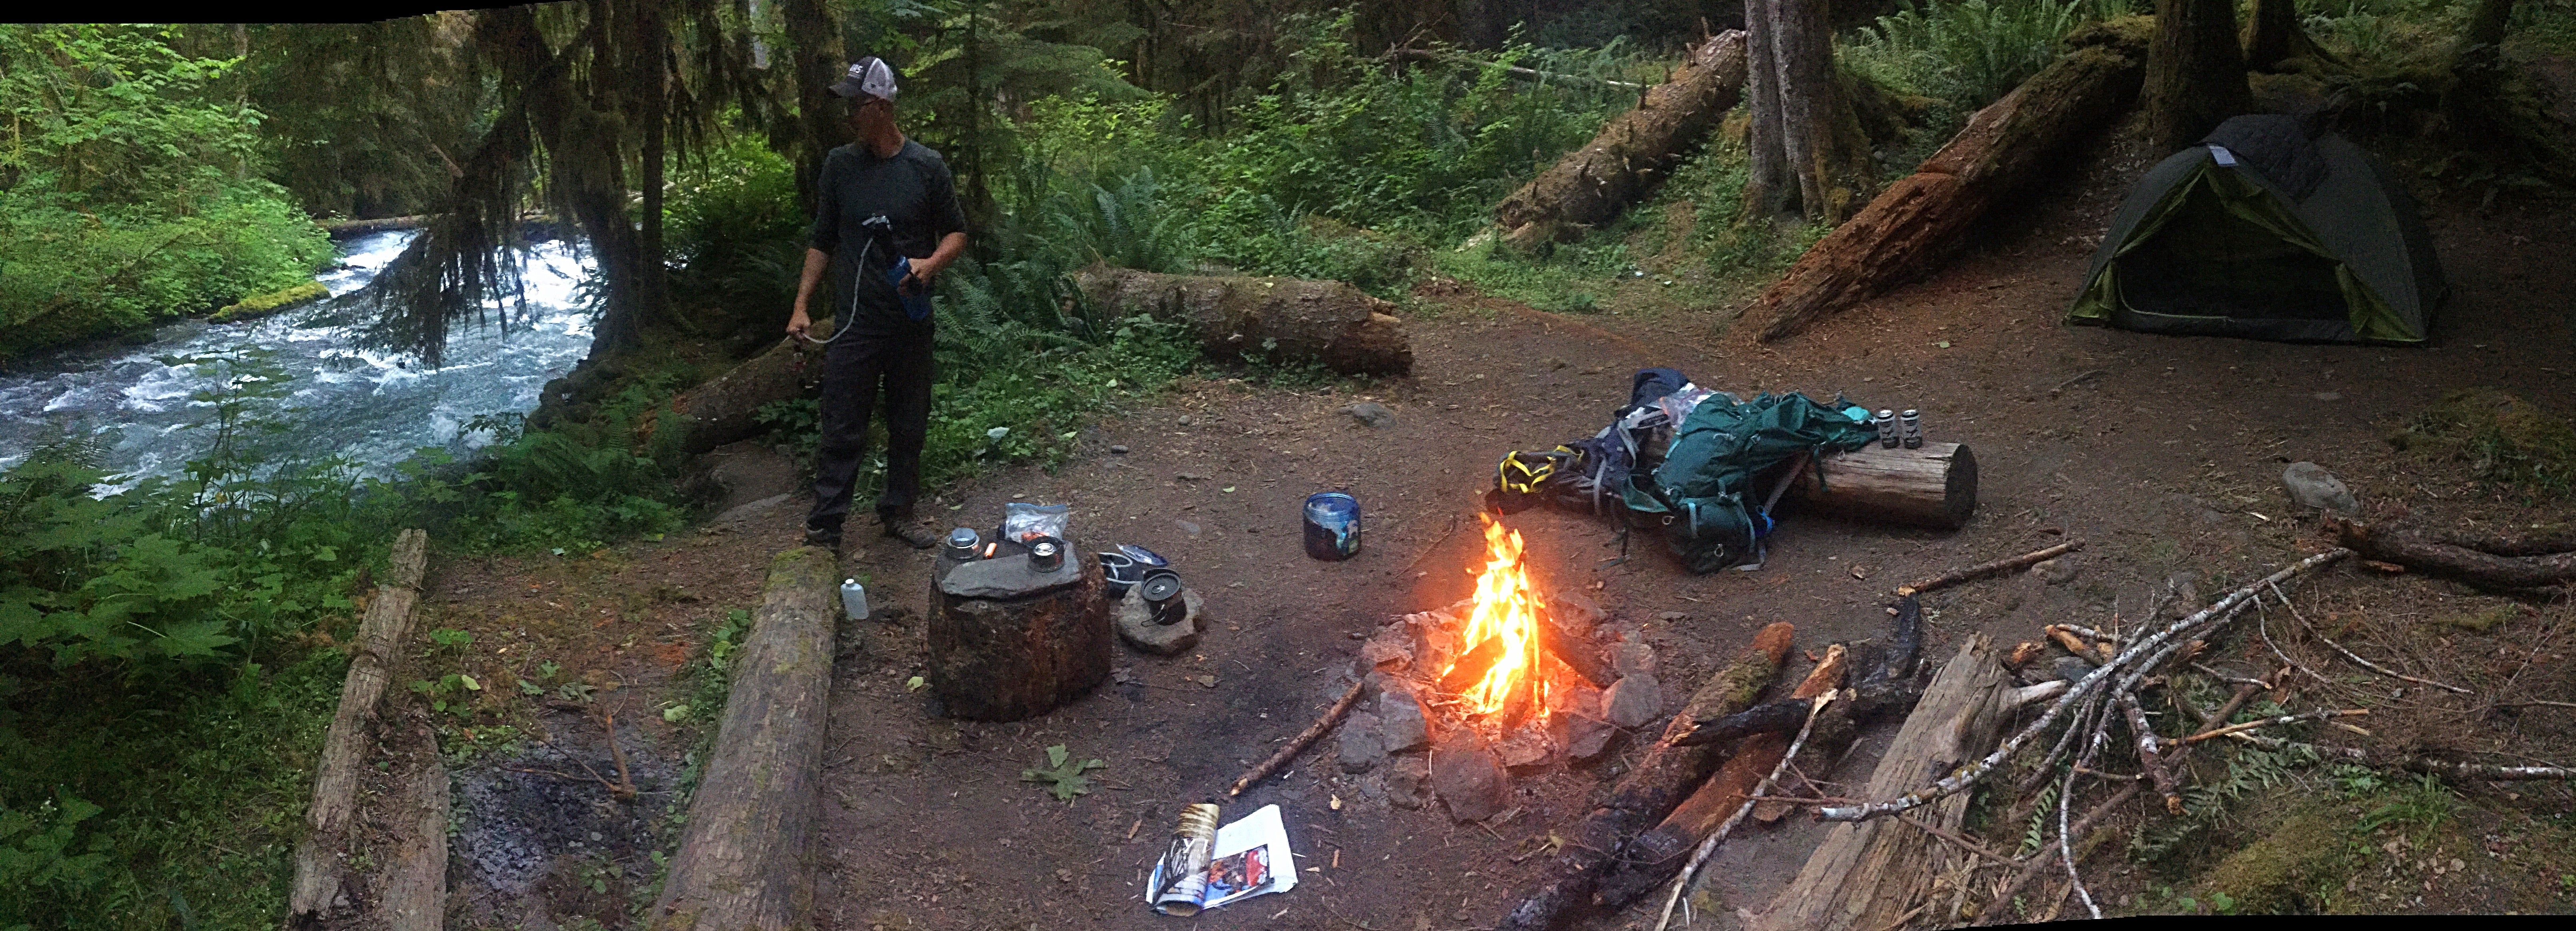 Camper submitted image from Lillian — Olympic National Park - 5